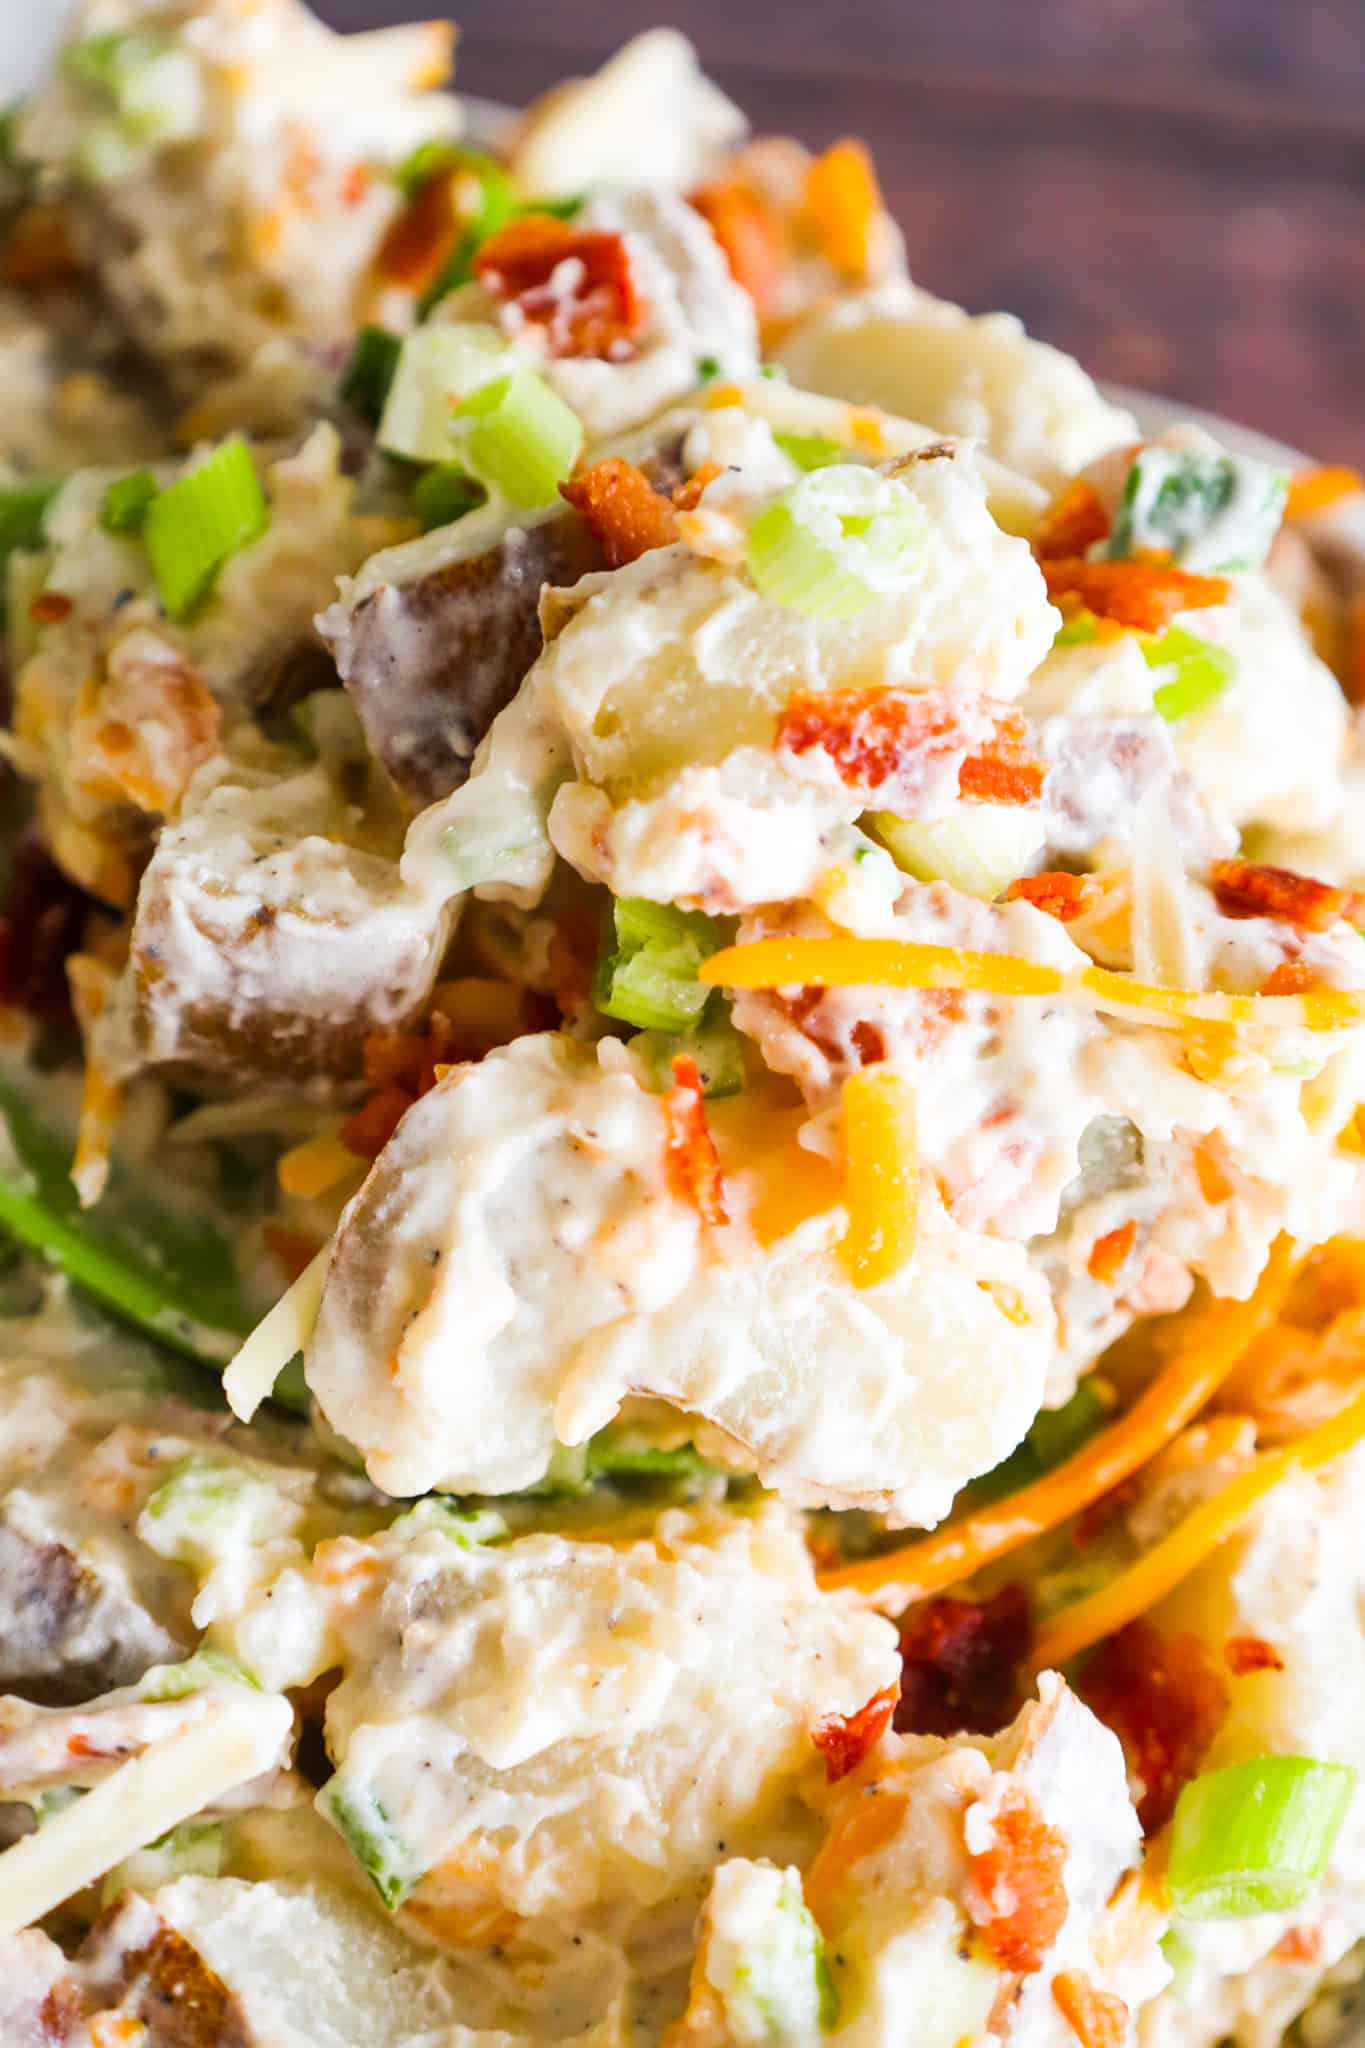 Loaded Baked Potato Salad is a delicious cold side dish recipe made with russet potatoes and loaded with mayo, sour cream, crumbled bacon, cheddar cheese and chopped green onions.